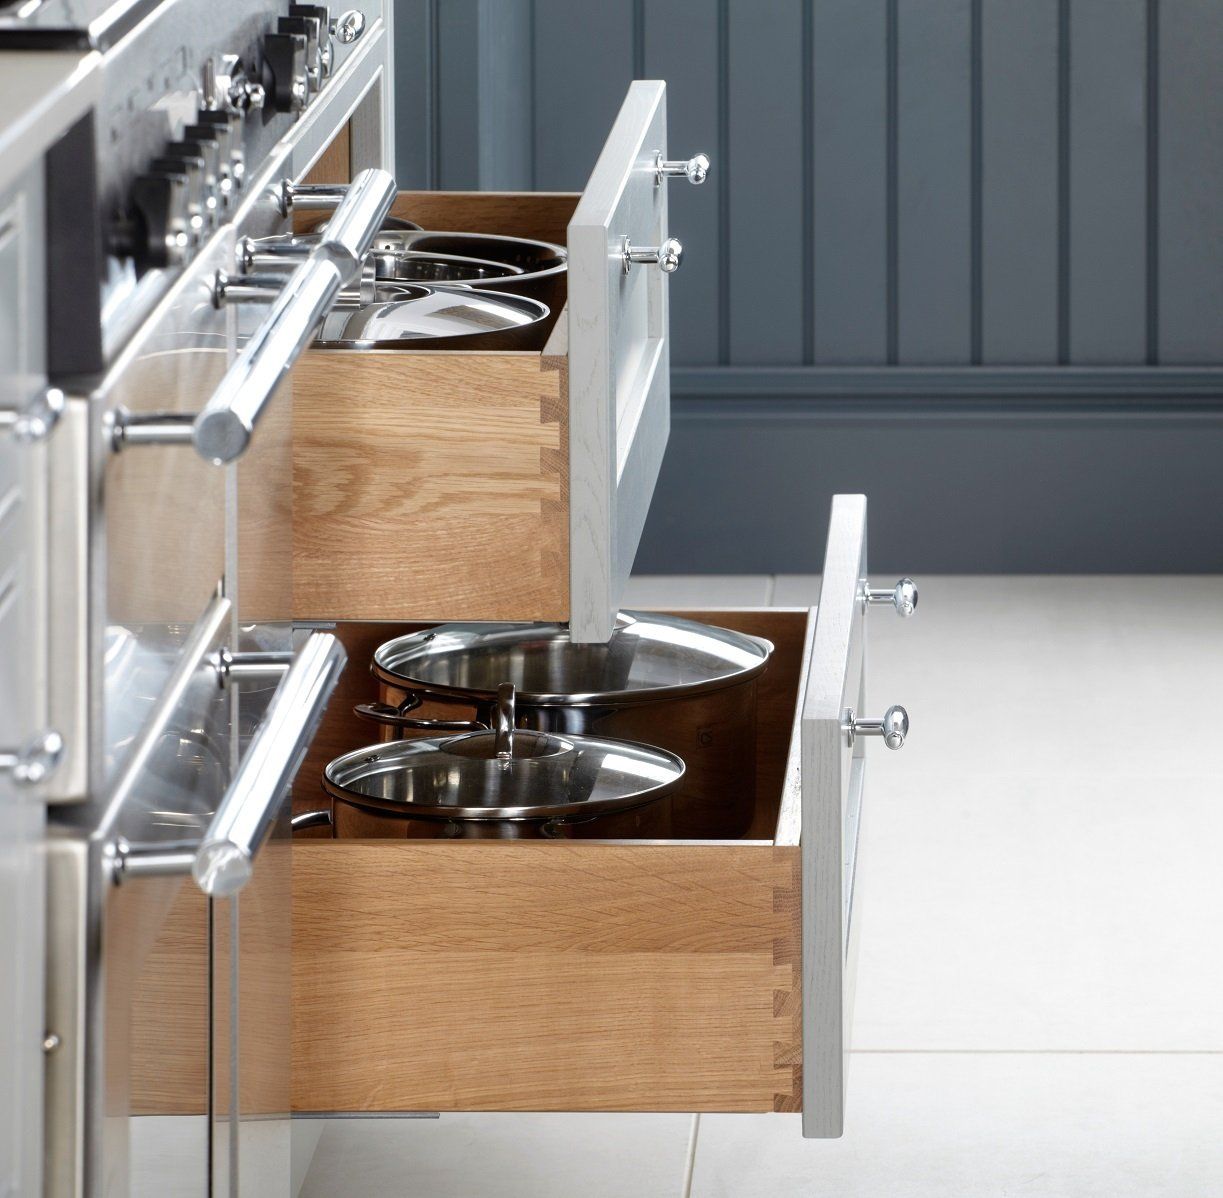 Dovetail wooden softclose drawers with steel large pans inside